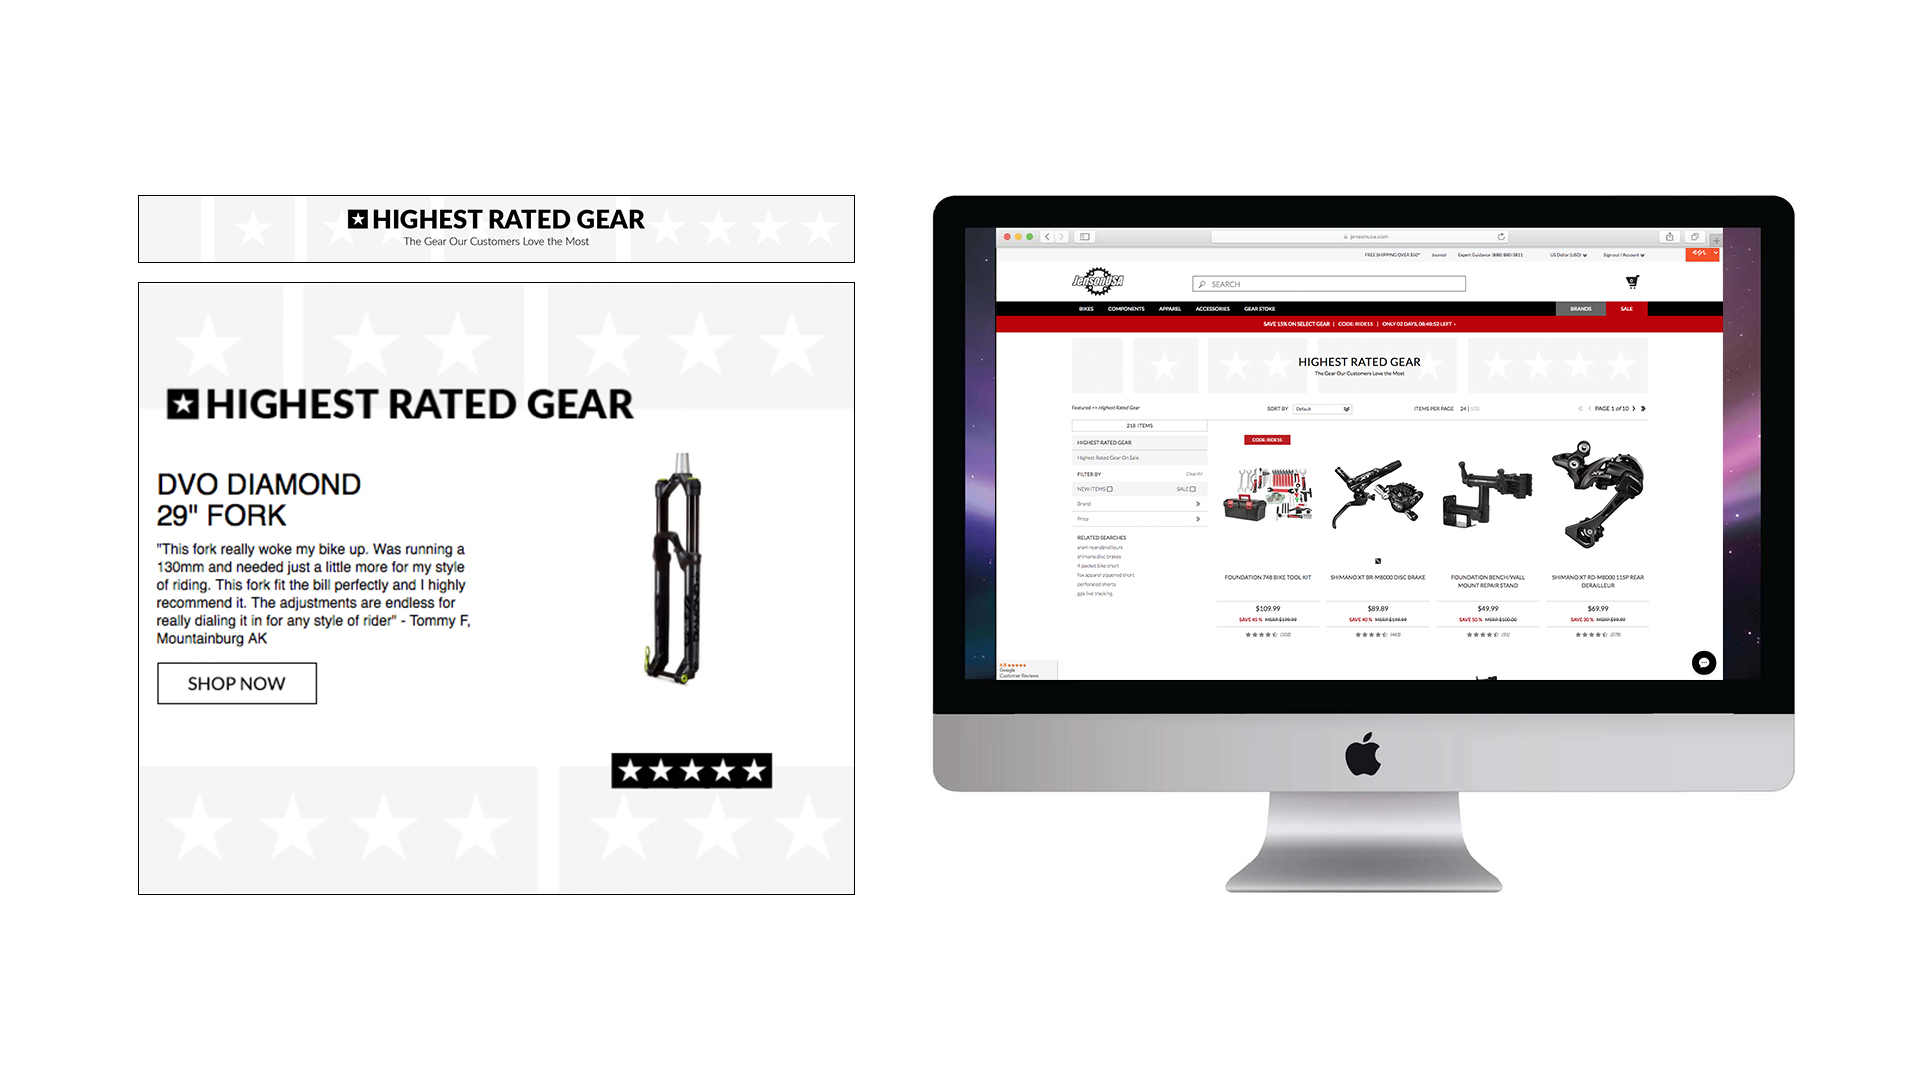 highest rated gear campaign and website feature branidng